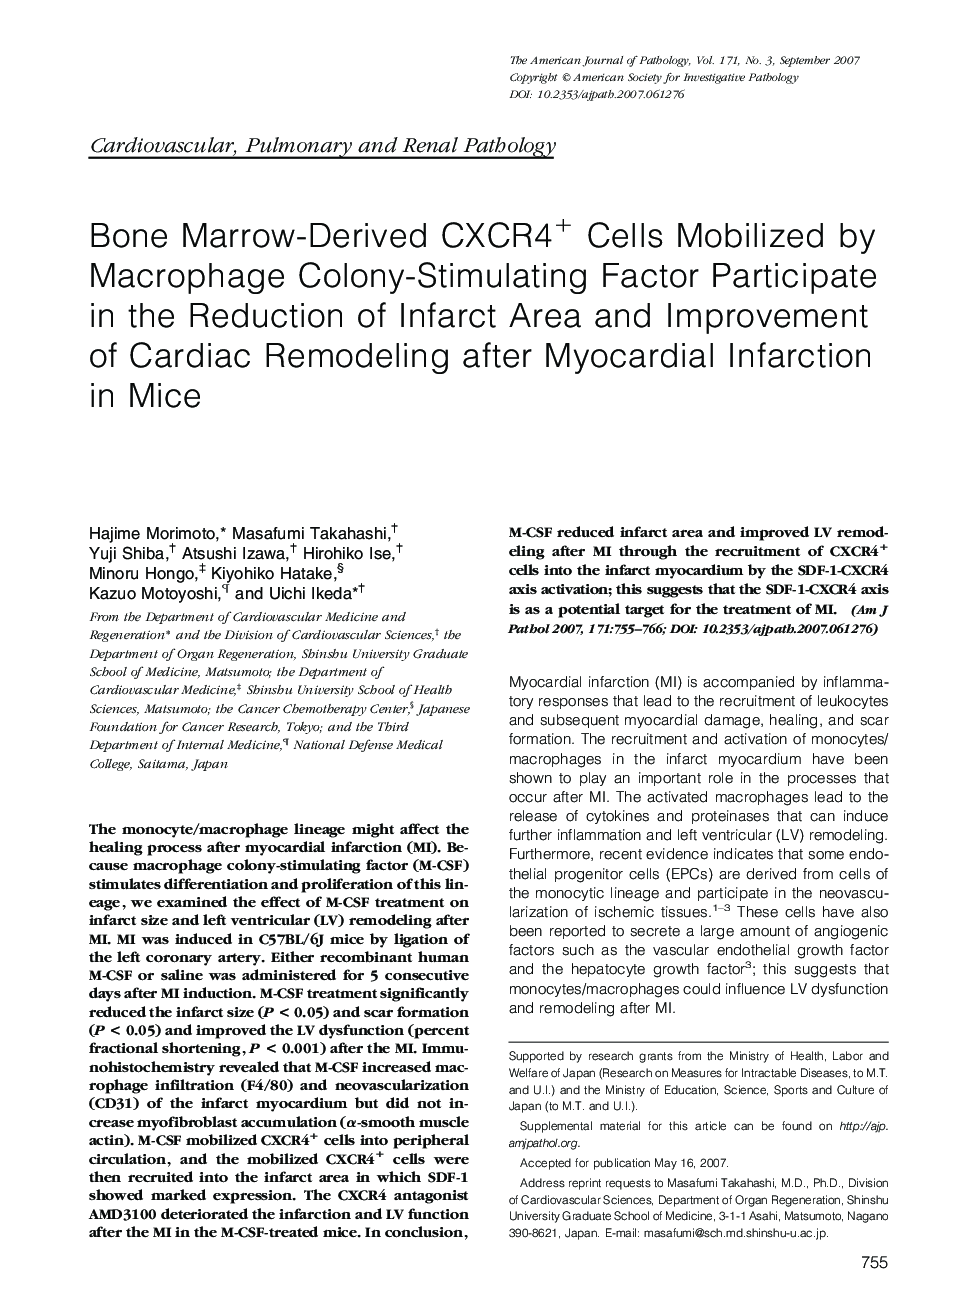 Bone Marrow-Derived CXCR4+ Cells Mobilized by Macrophage Colony-Stimulating Factor Participate in the Reduction of Infarct Area and Improvement of Cardiac Remodeling after Myocardial Infarction in Mice